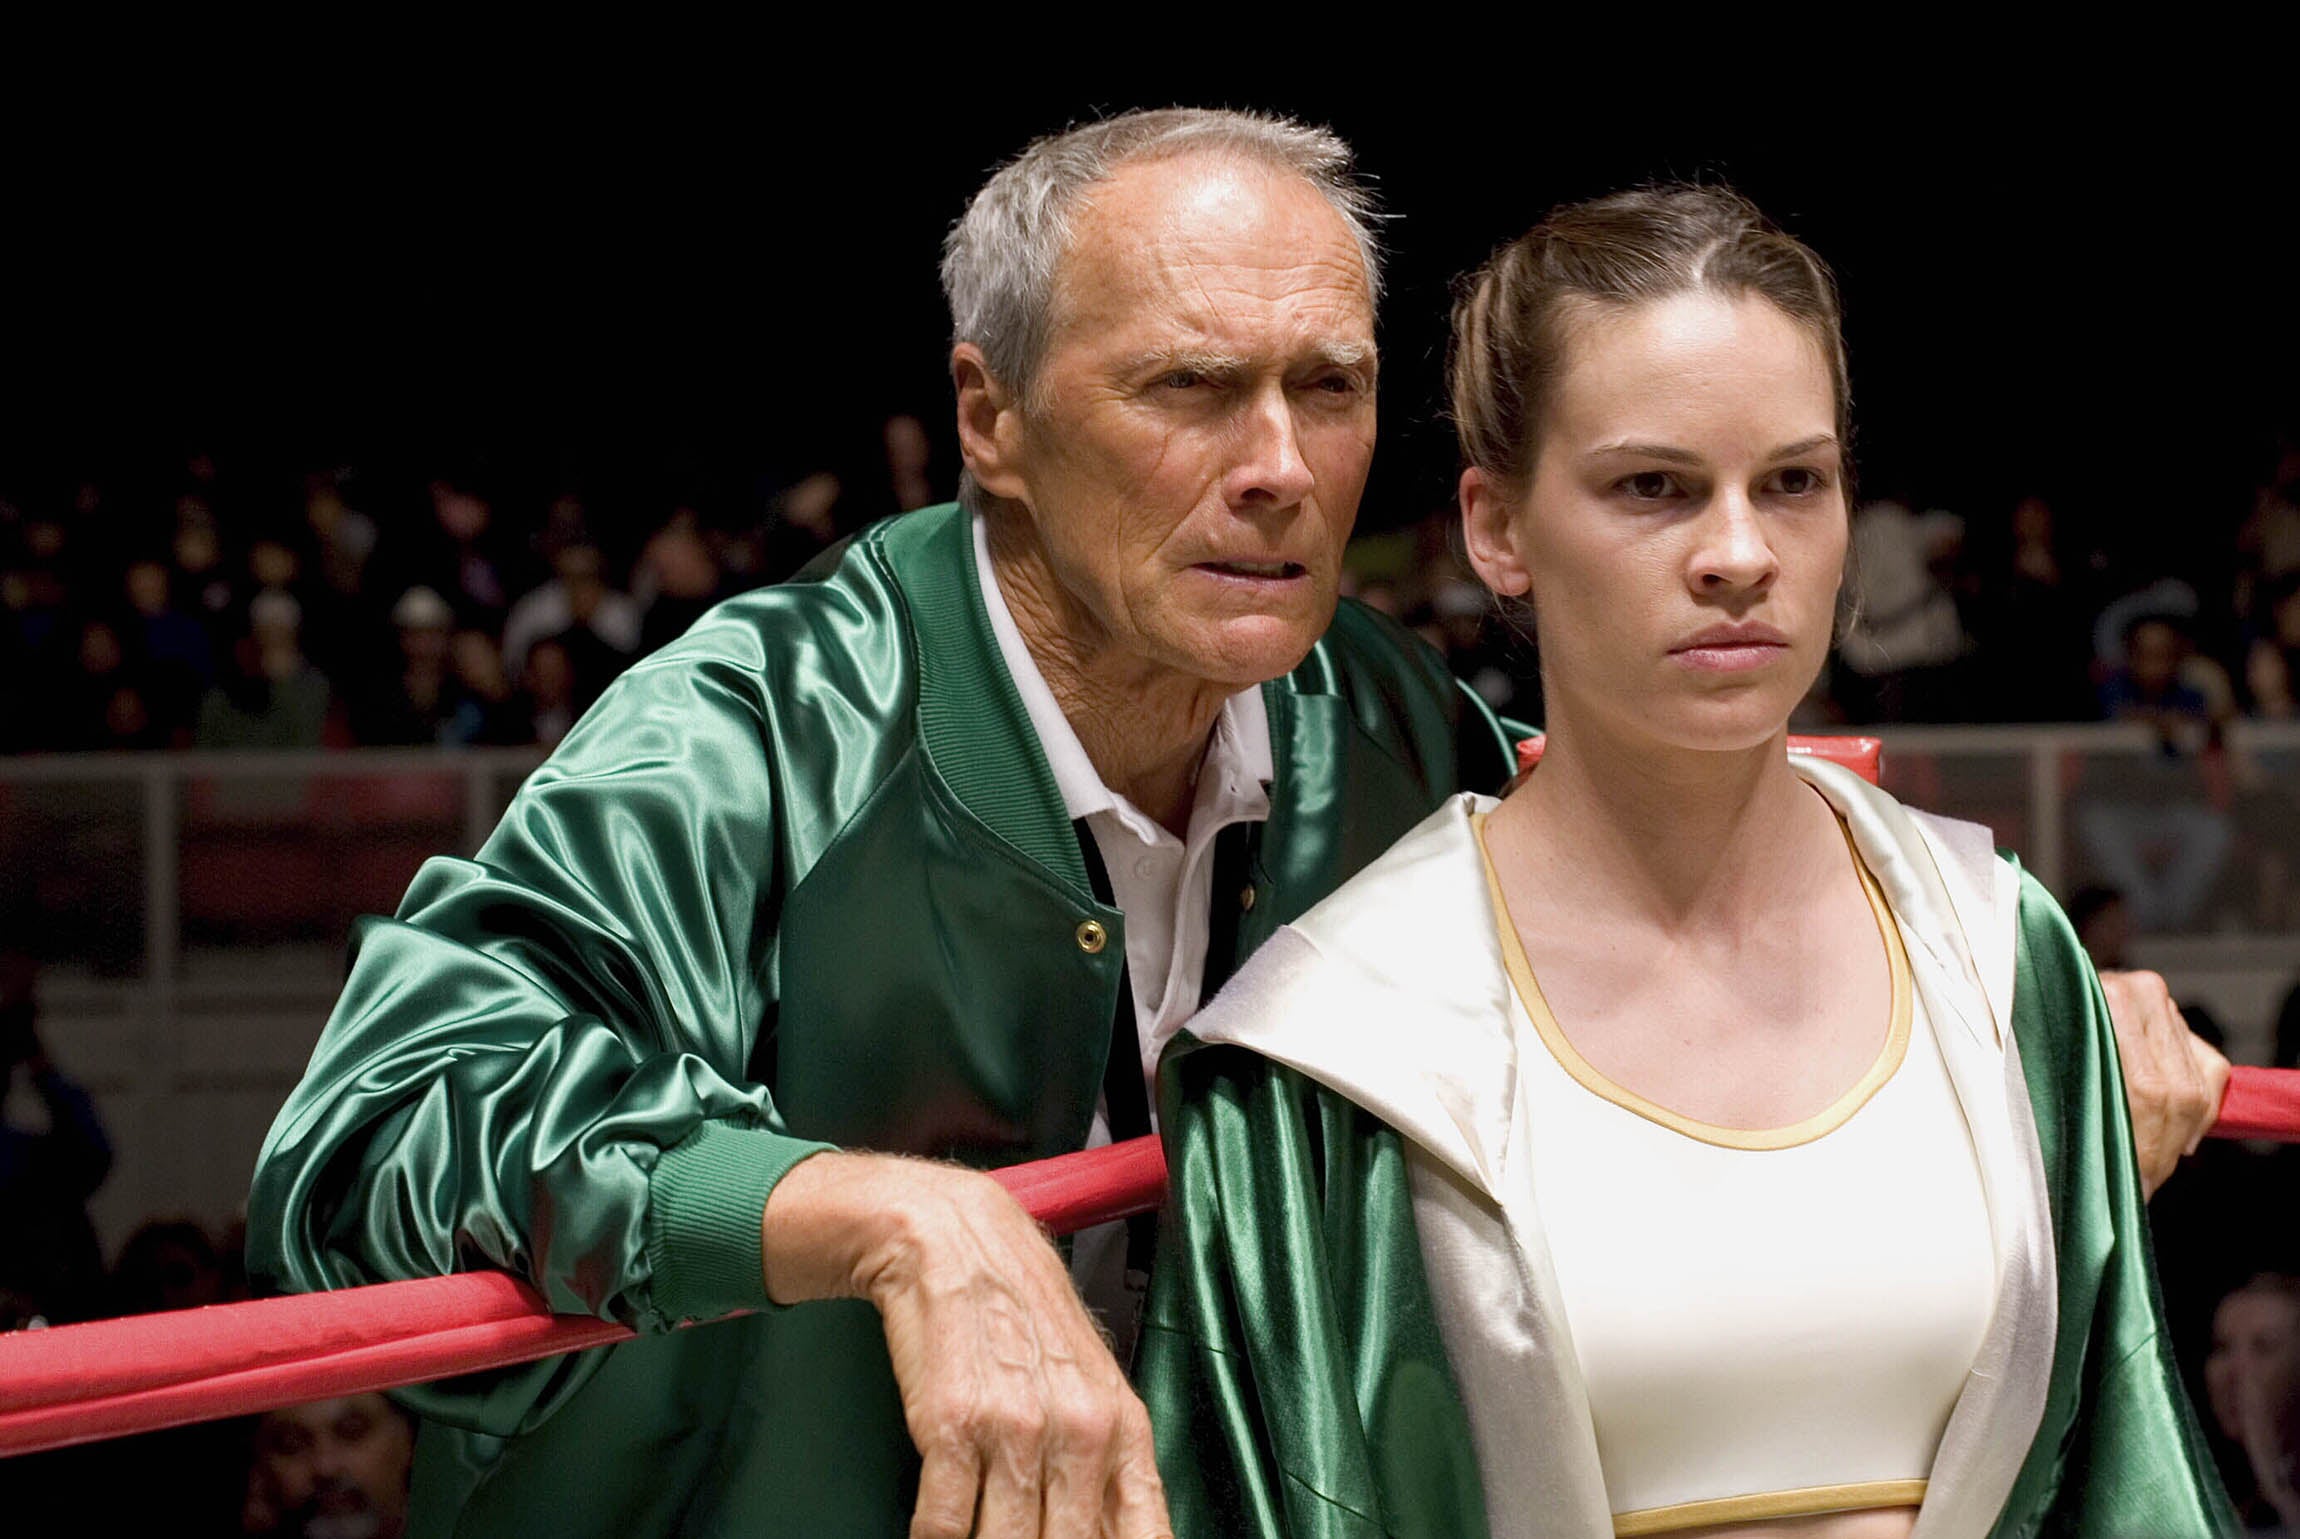 In the ring: Clint Eastwood and Swank in ‘Million Dollar Baby’